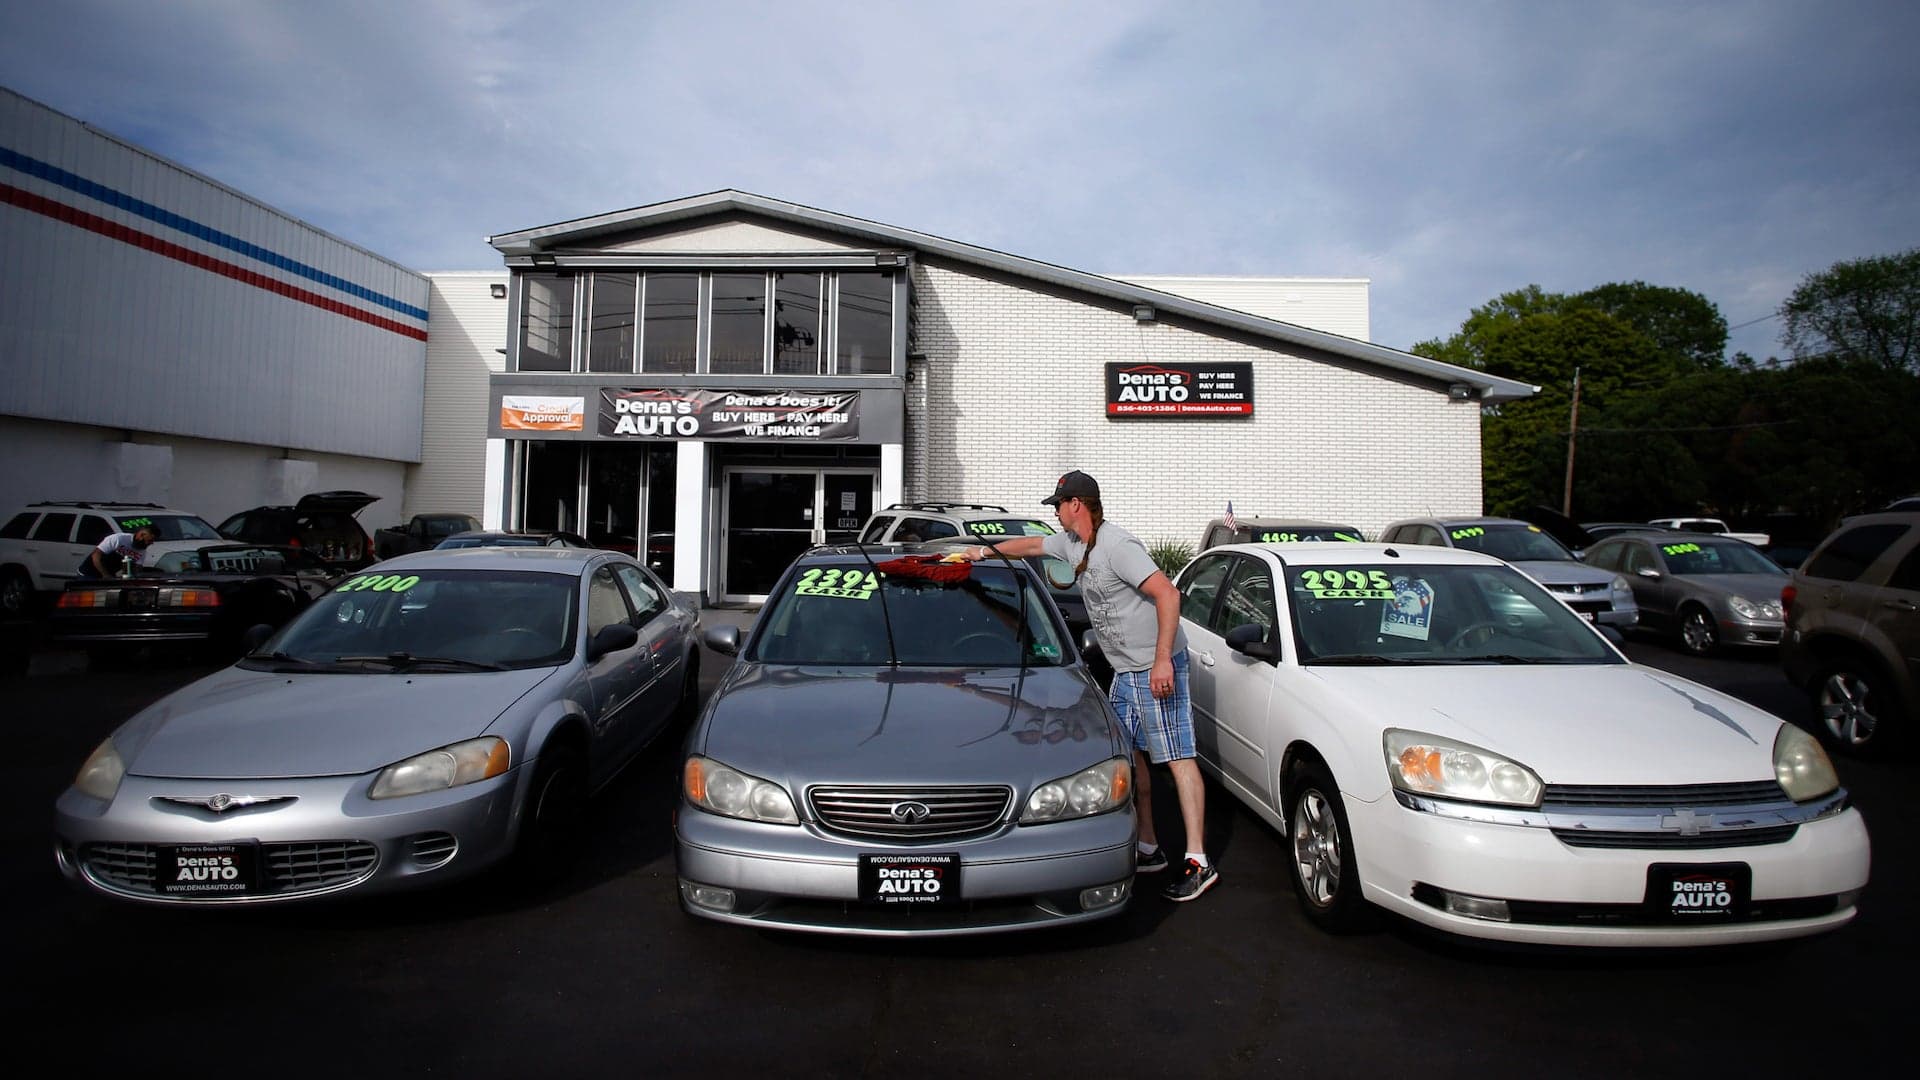 Used Car Sales May Be the Only Thing Dealers Are Happy About Right Now